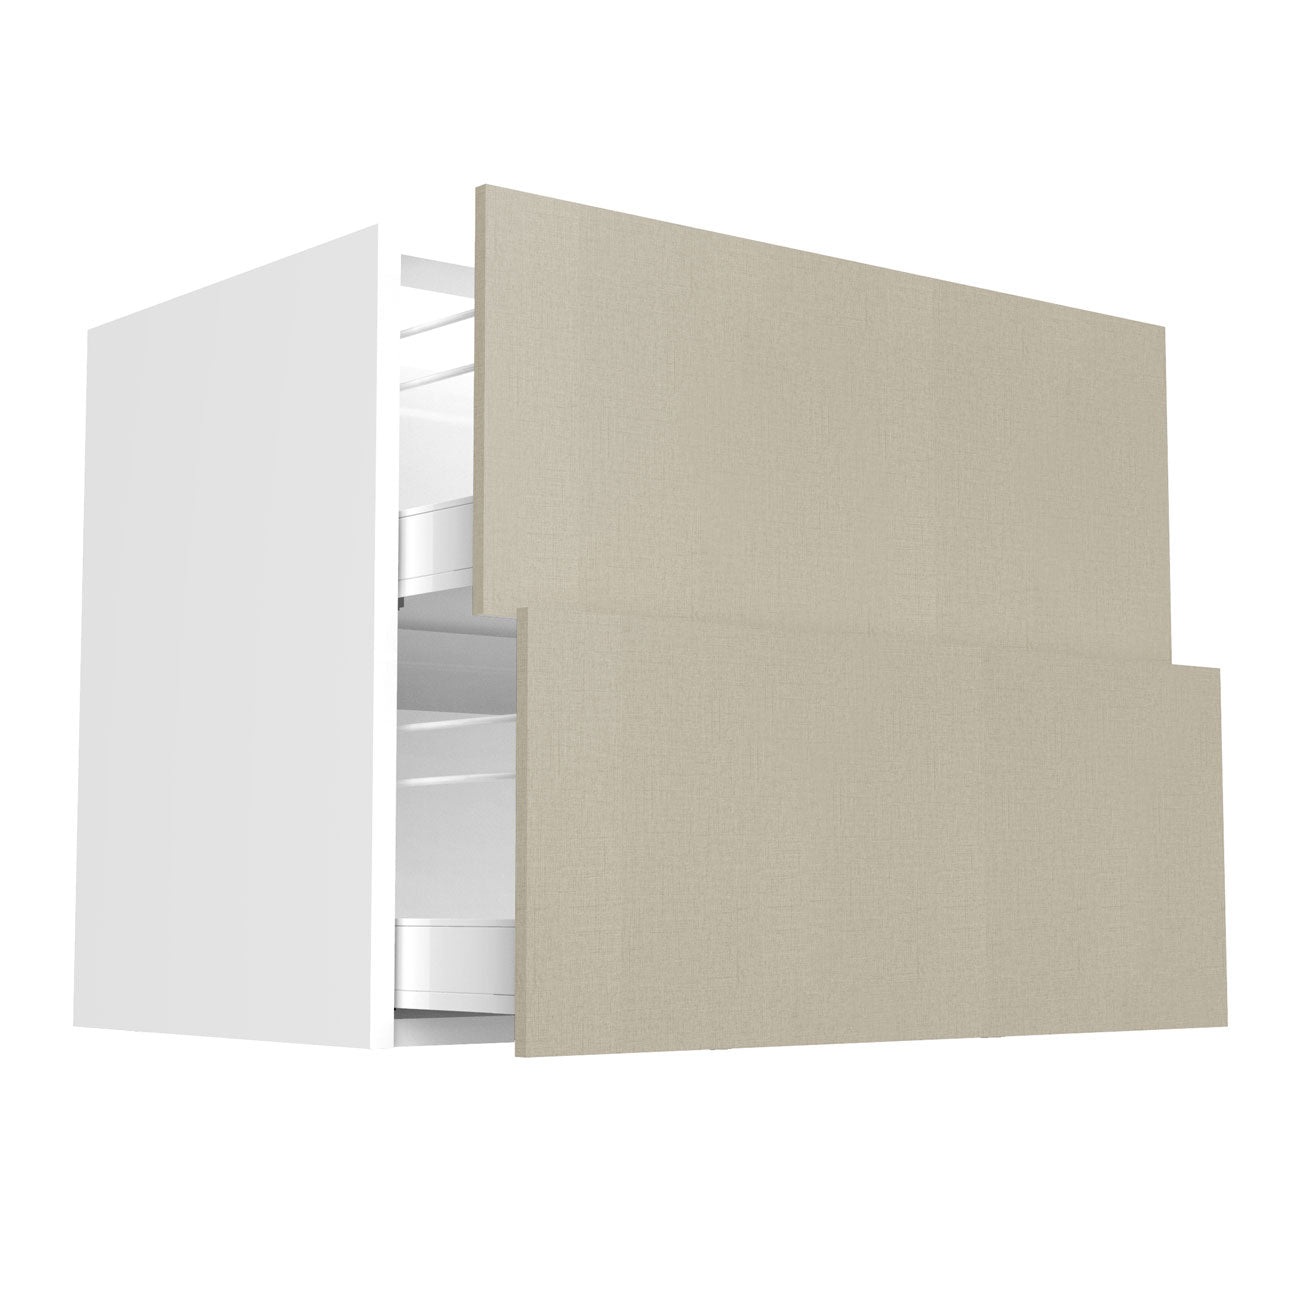 RTA - Fabric Grey - Two Drawer Base Cabinets | 36"W x 30"H x 23.8"D